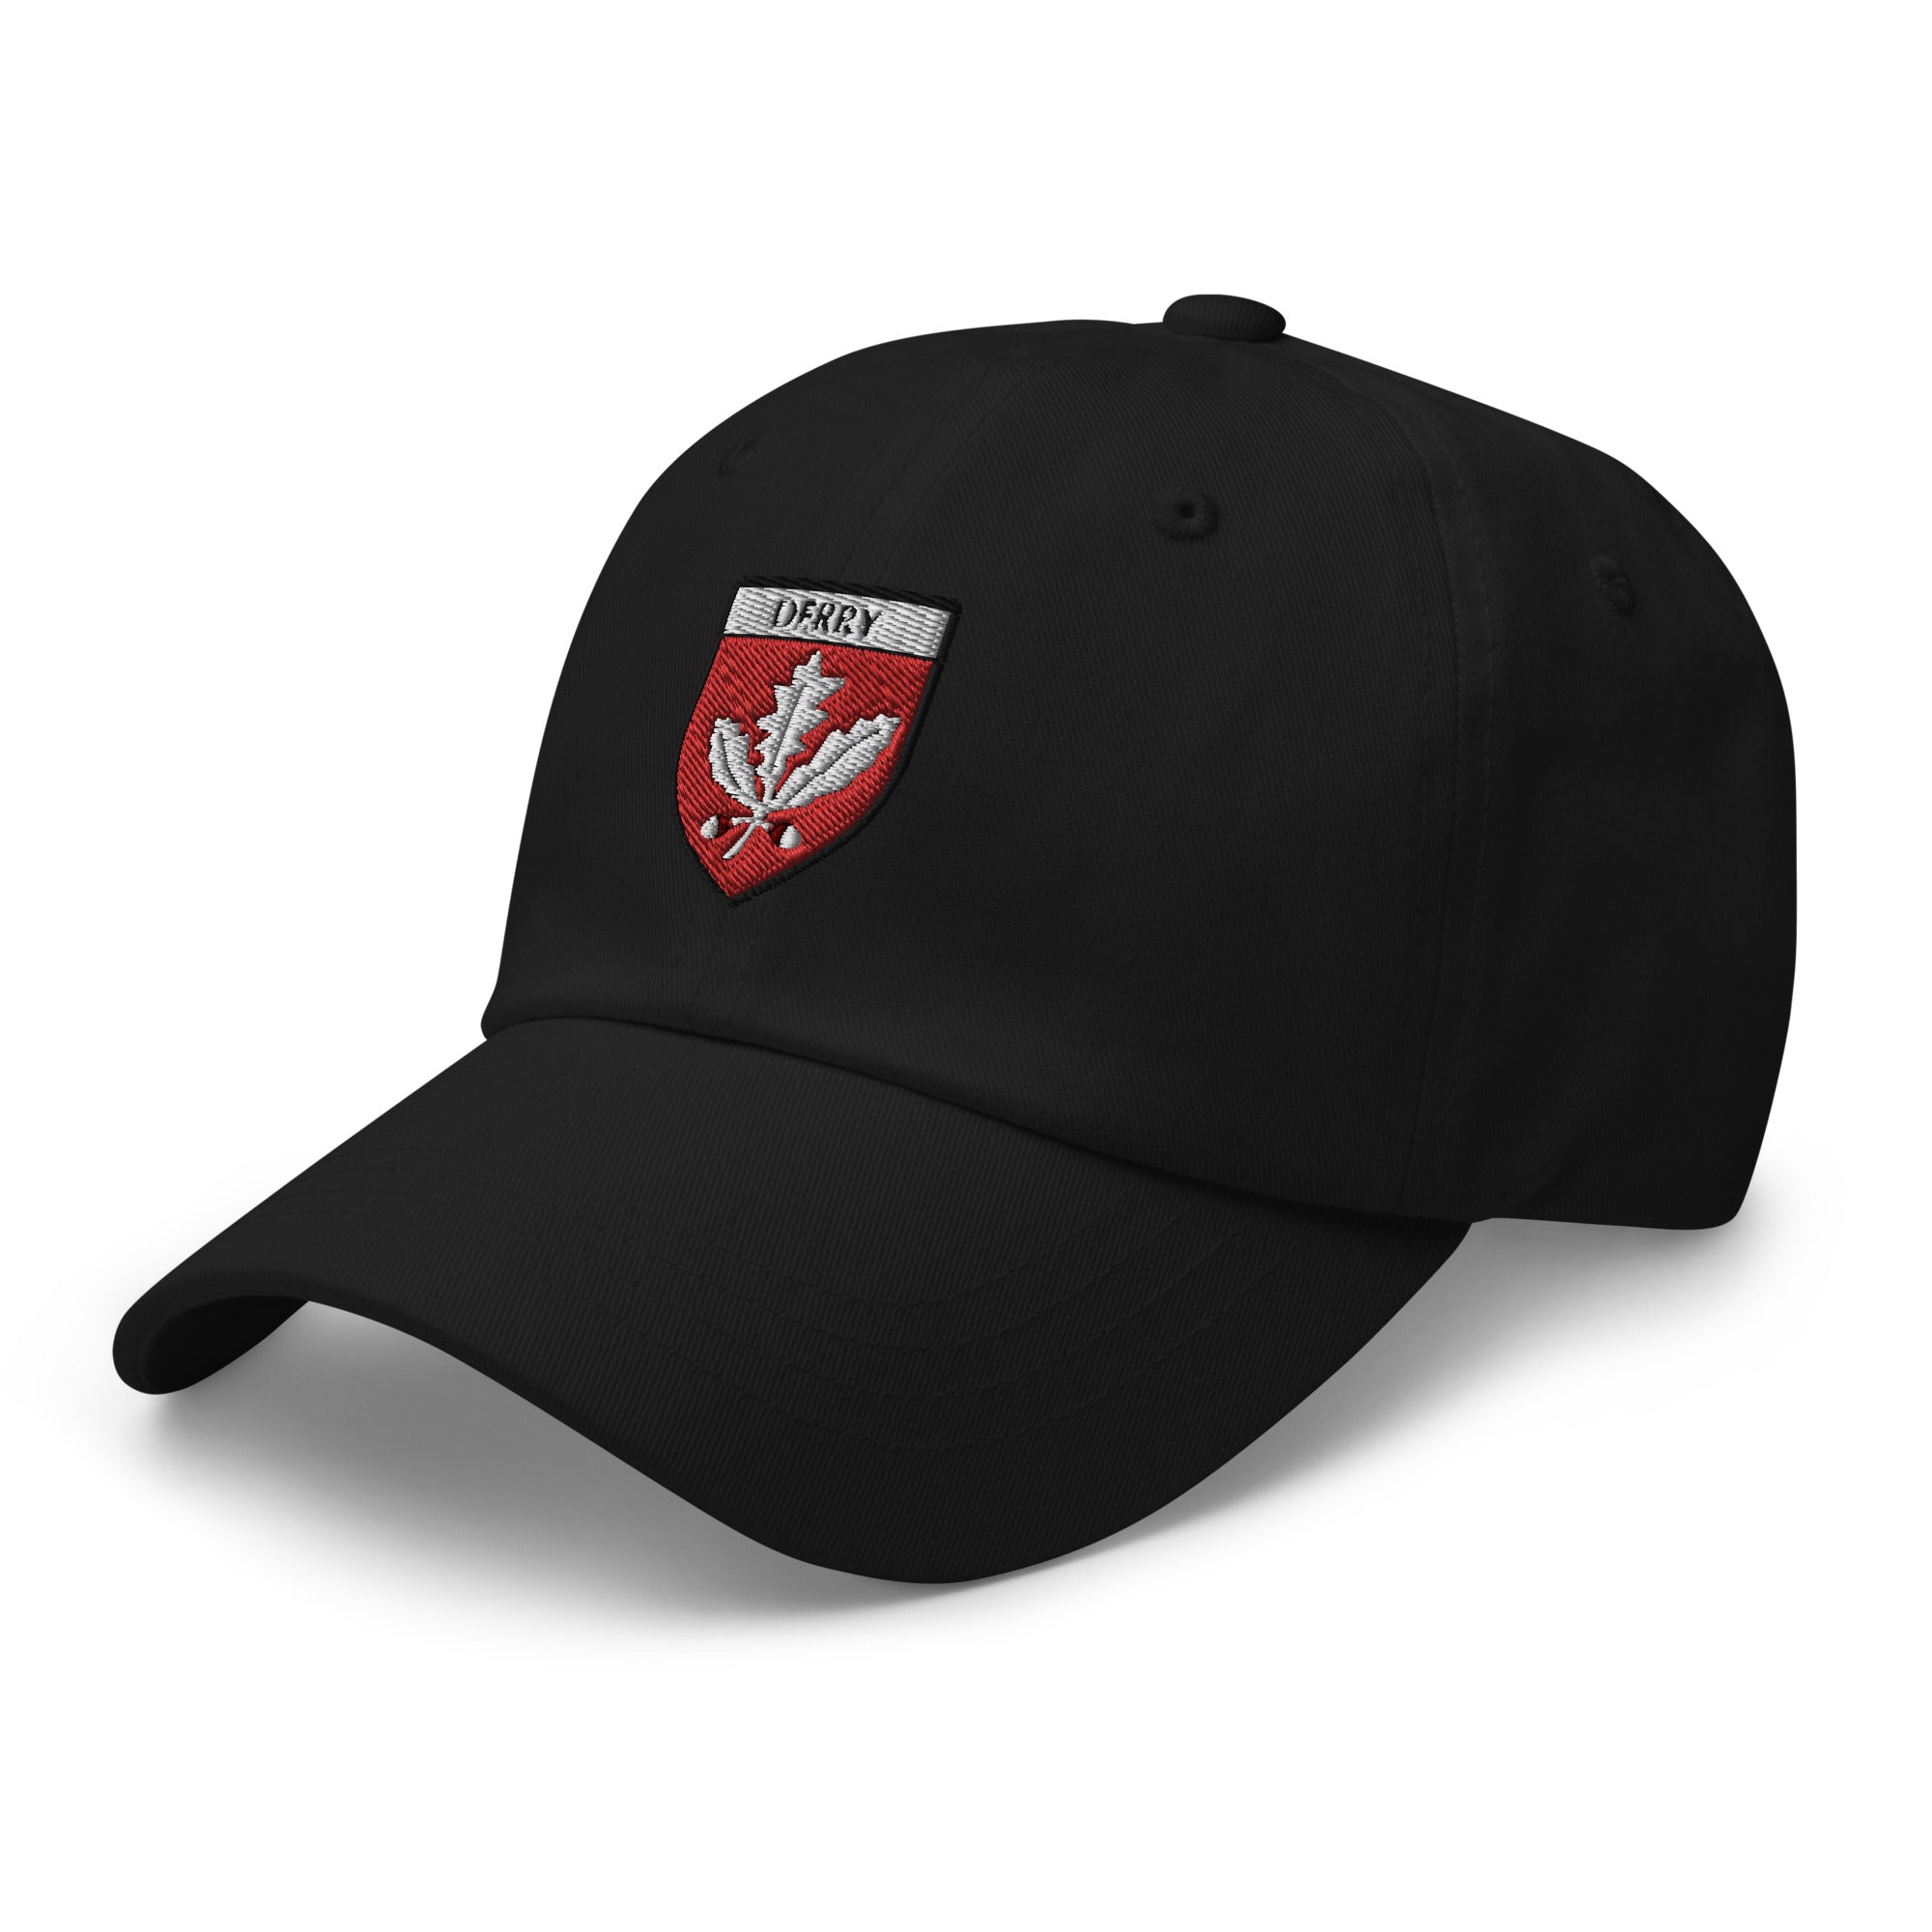 County Derry Supporters Crest Baseball Cap Black County Wear